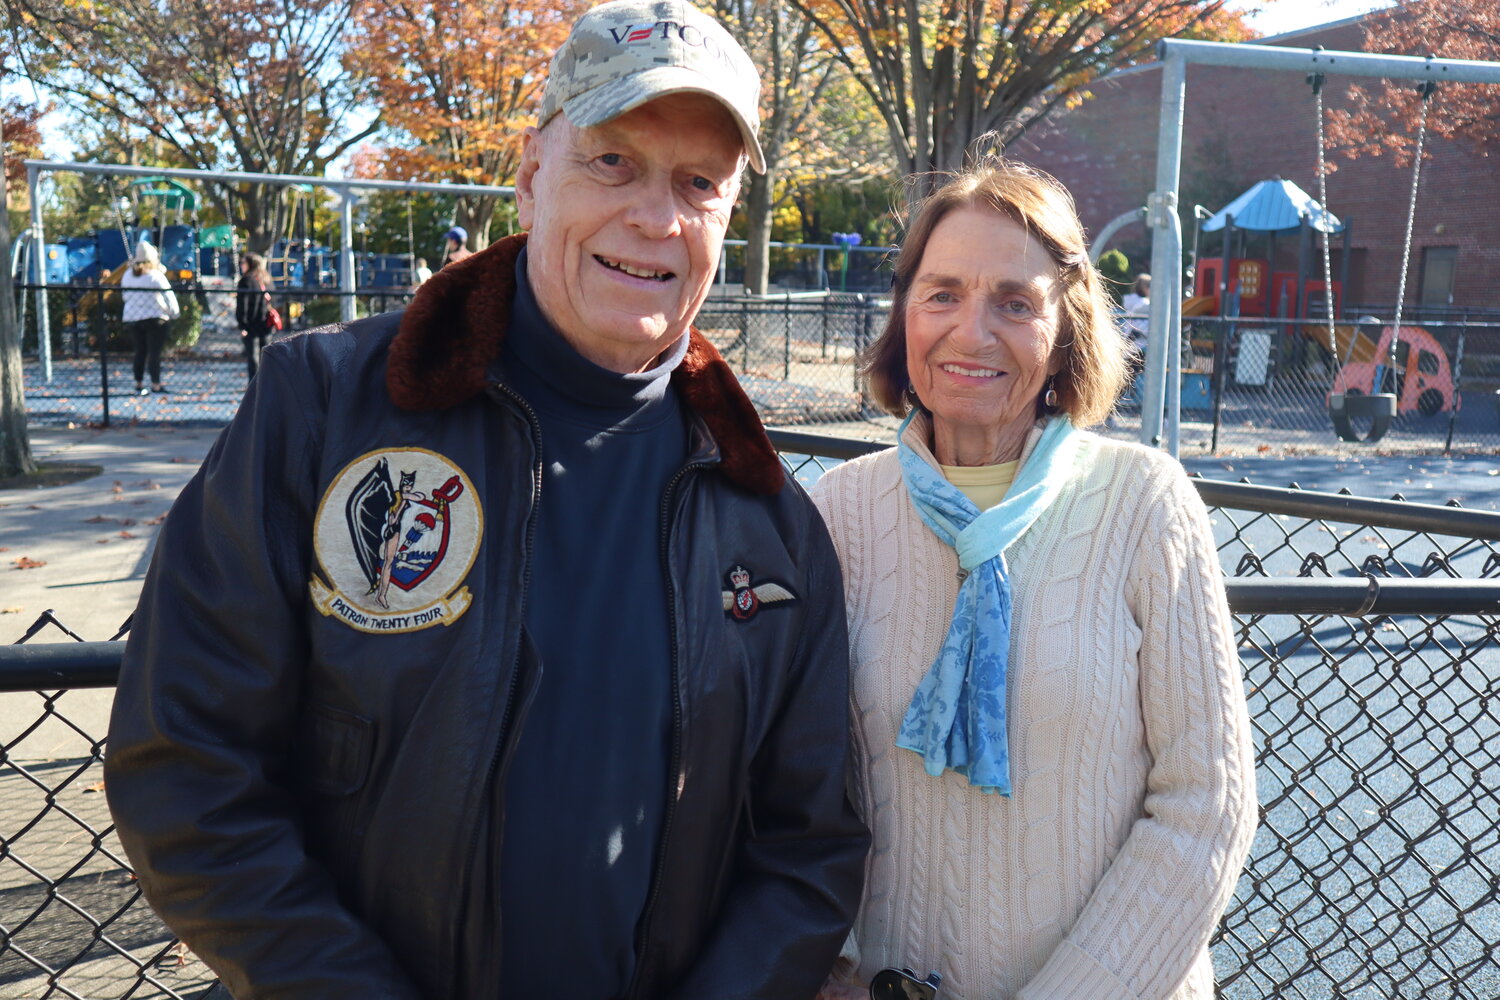 U.S. Navy veteran Greg Rinn, left, and his wife, Jane, share details on his years as a pilot in the service.